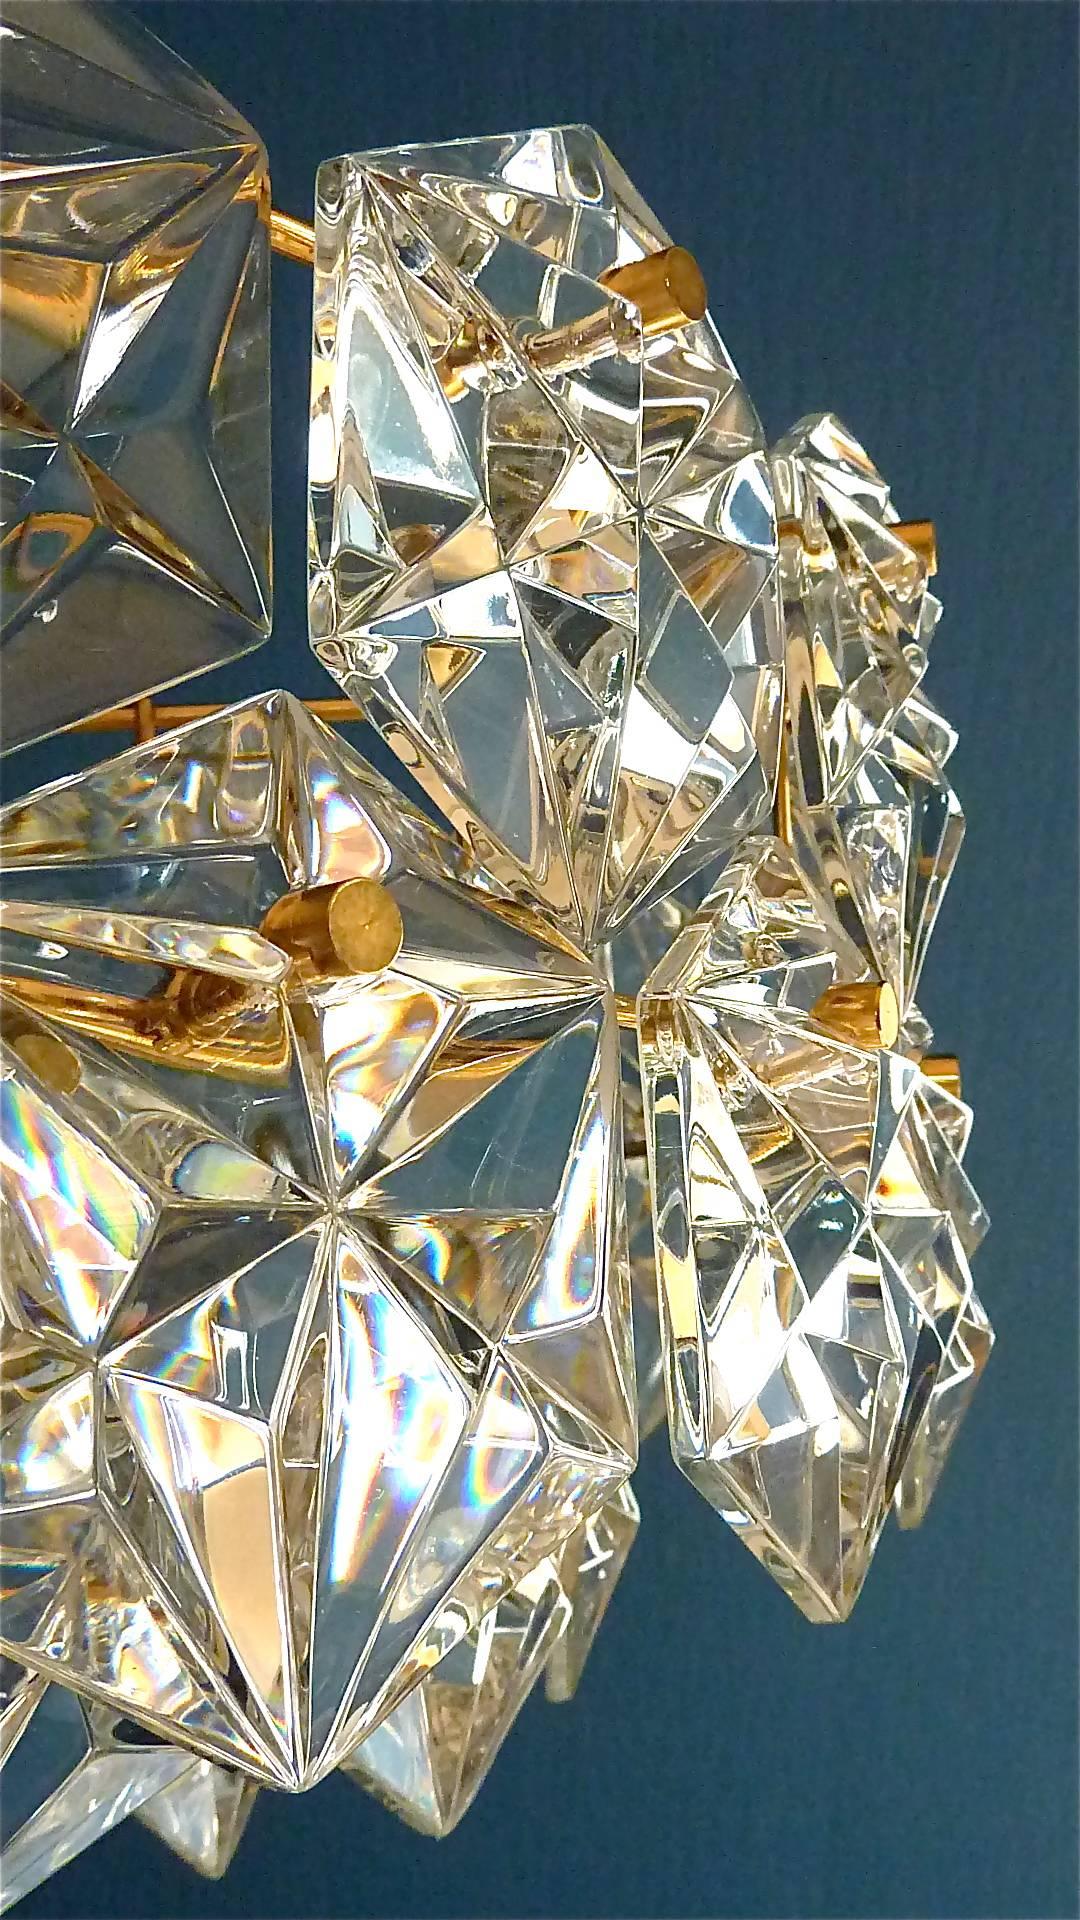 Large gilt Mid-Century Modernist Kinkeldey chandelier made in Germany, circa 1960-1970. It has 66 hexagonal diamond-shape faceted glass crystals, each 9 x 9 cm / 3.54 x 3.54 in. mounted on a five-tier gilt brass metal fixture. It needs 6 x E14 and 1